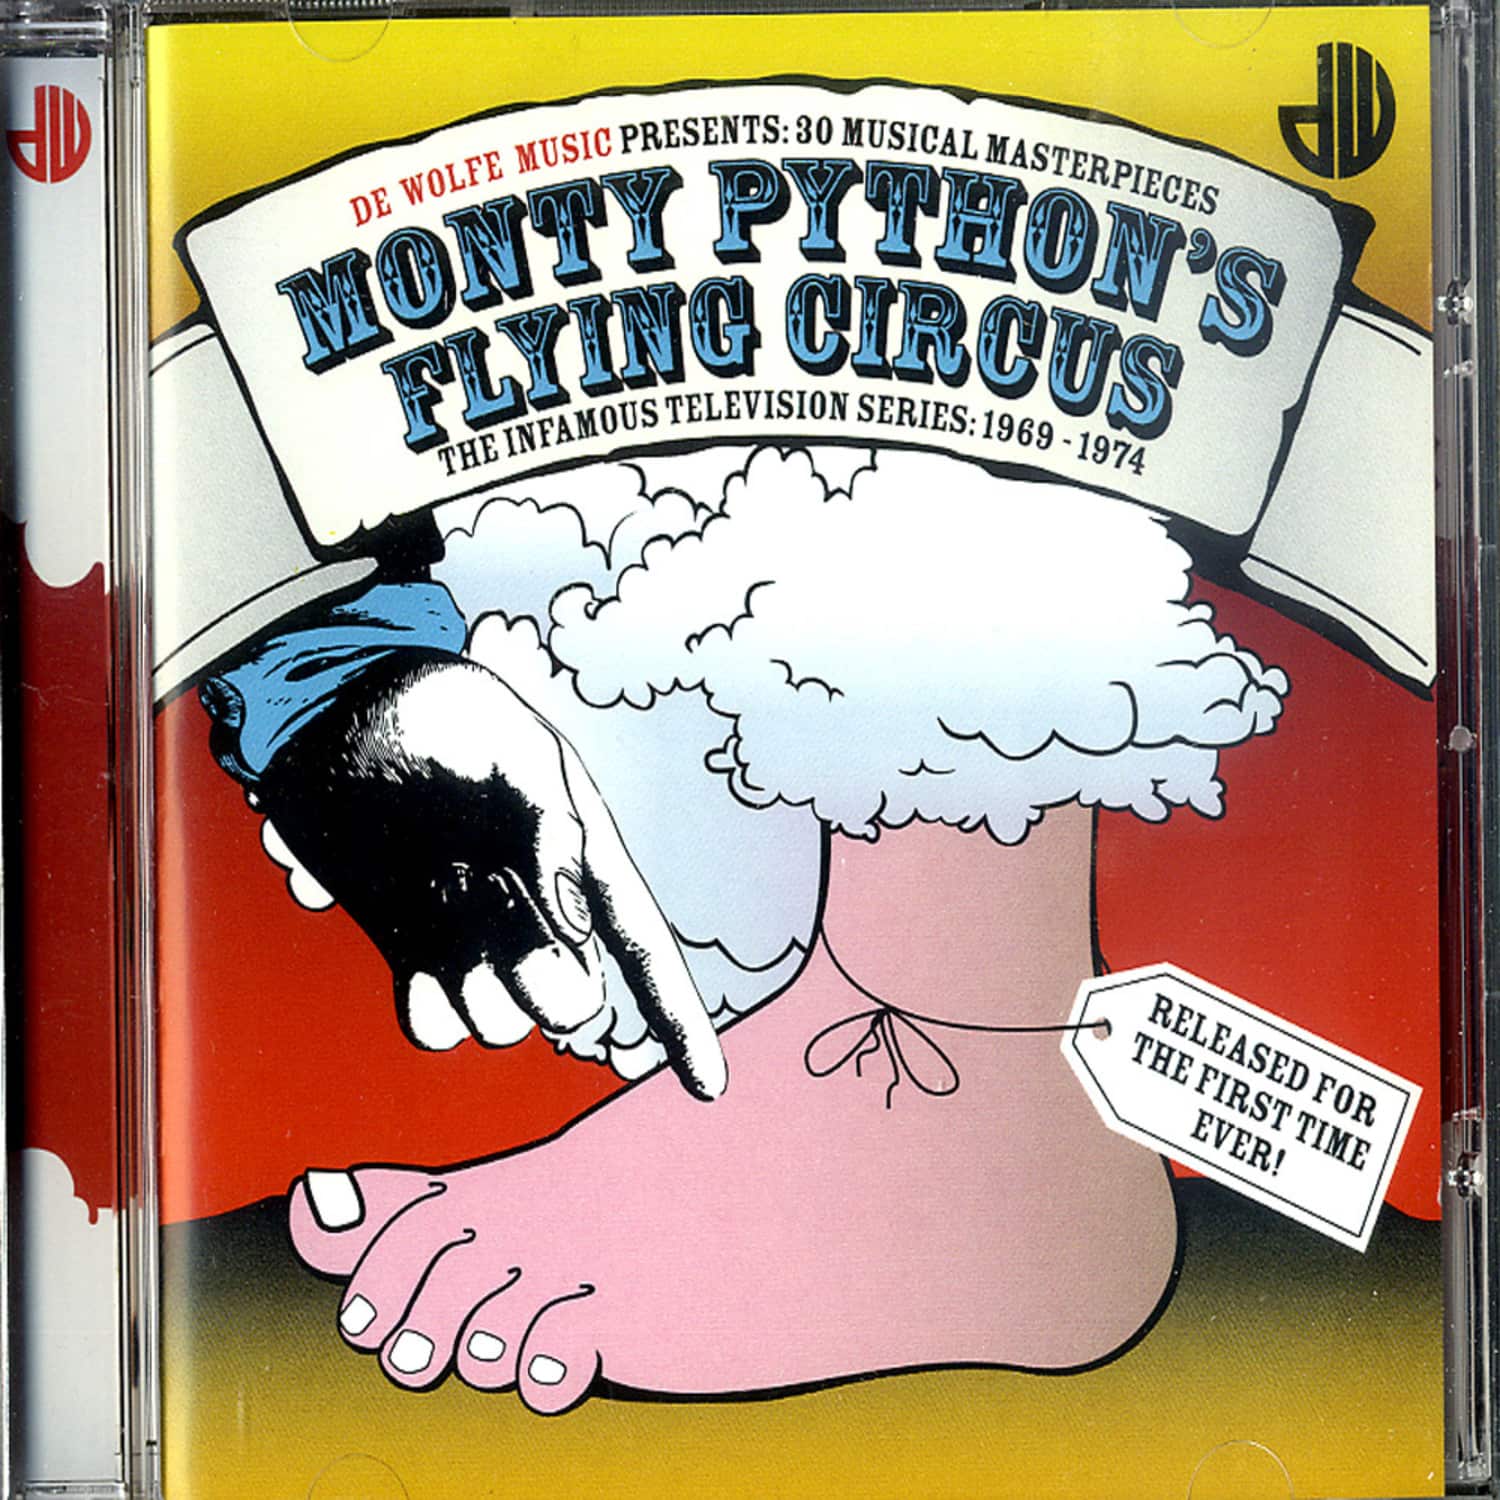 Monty Pythons Flying Circus Present - THE UNRELEASED TV SOUNDTRACK 1969 - 1974 